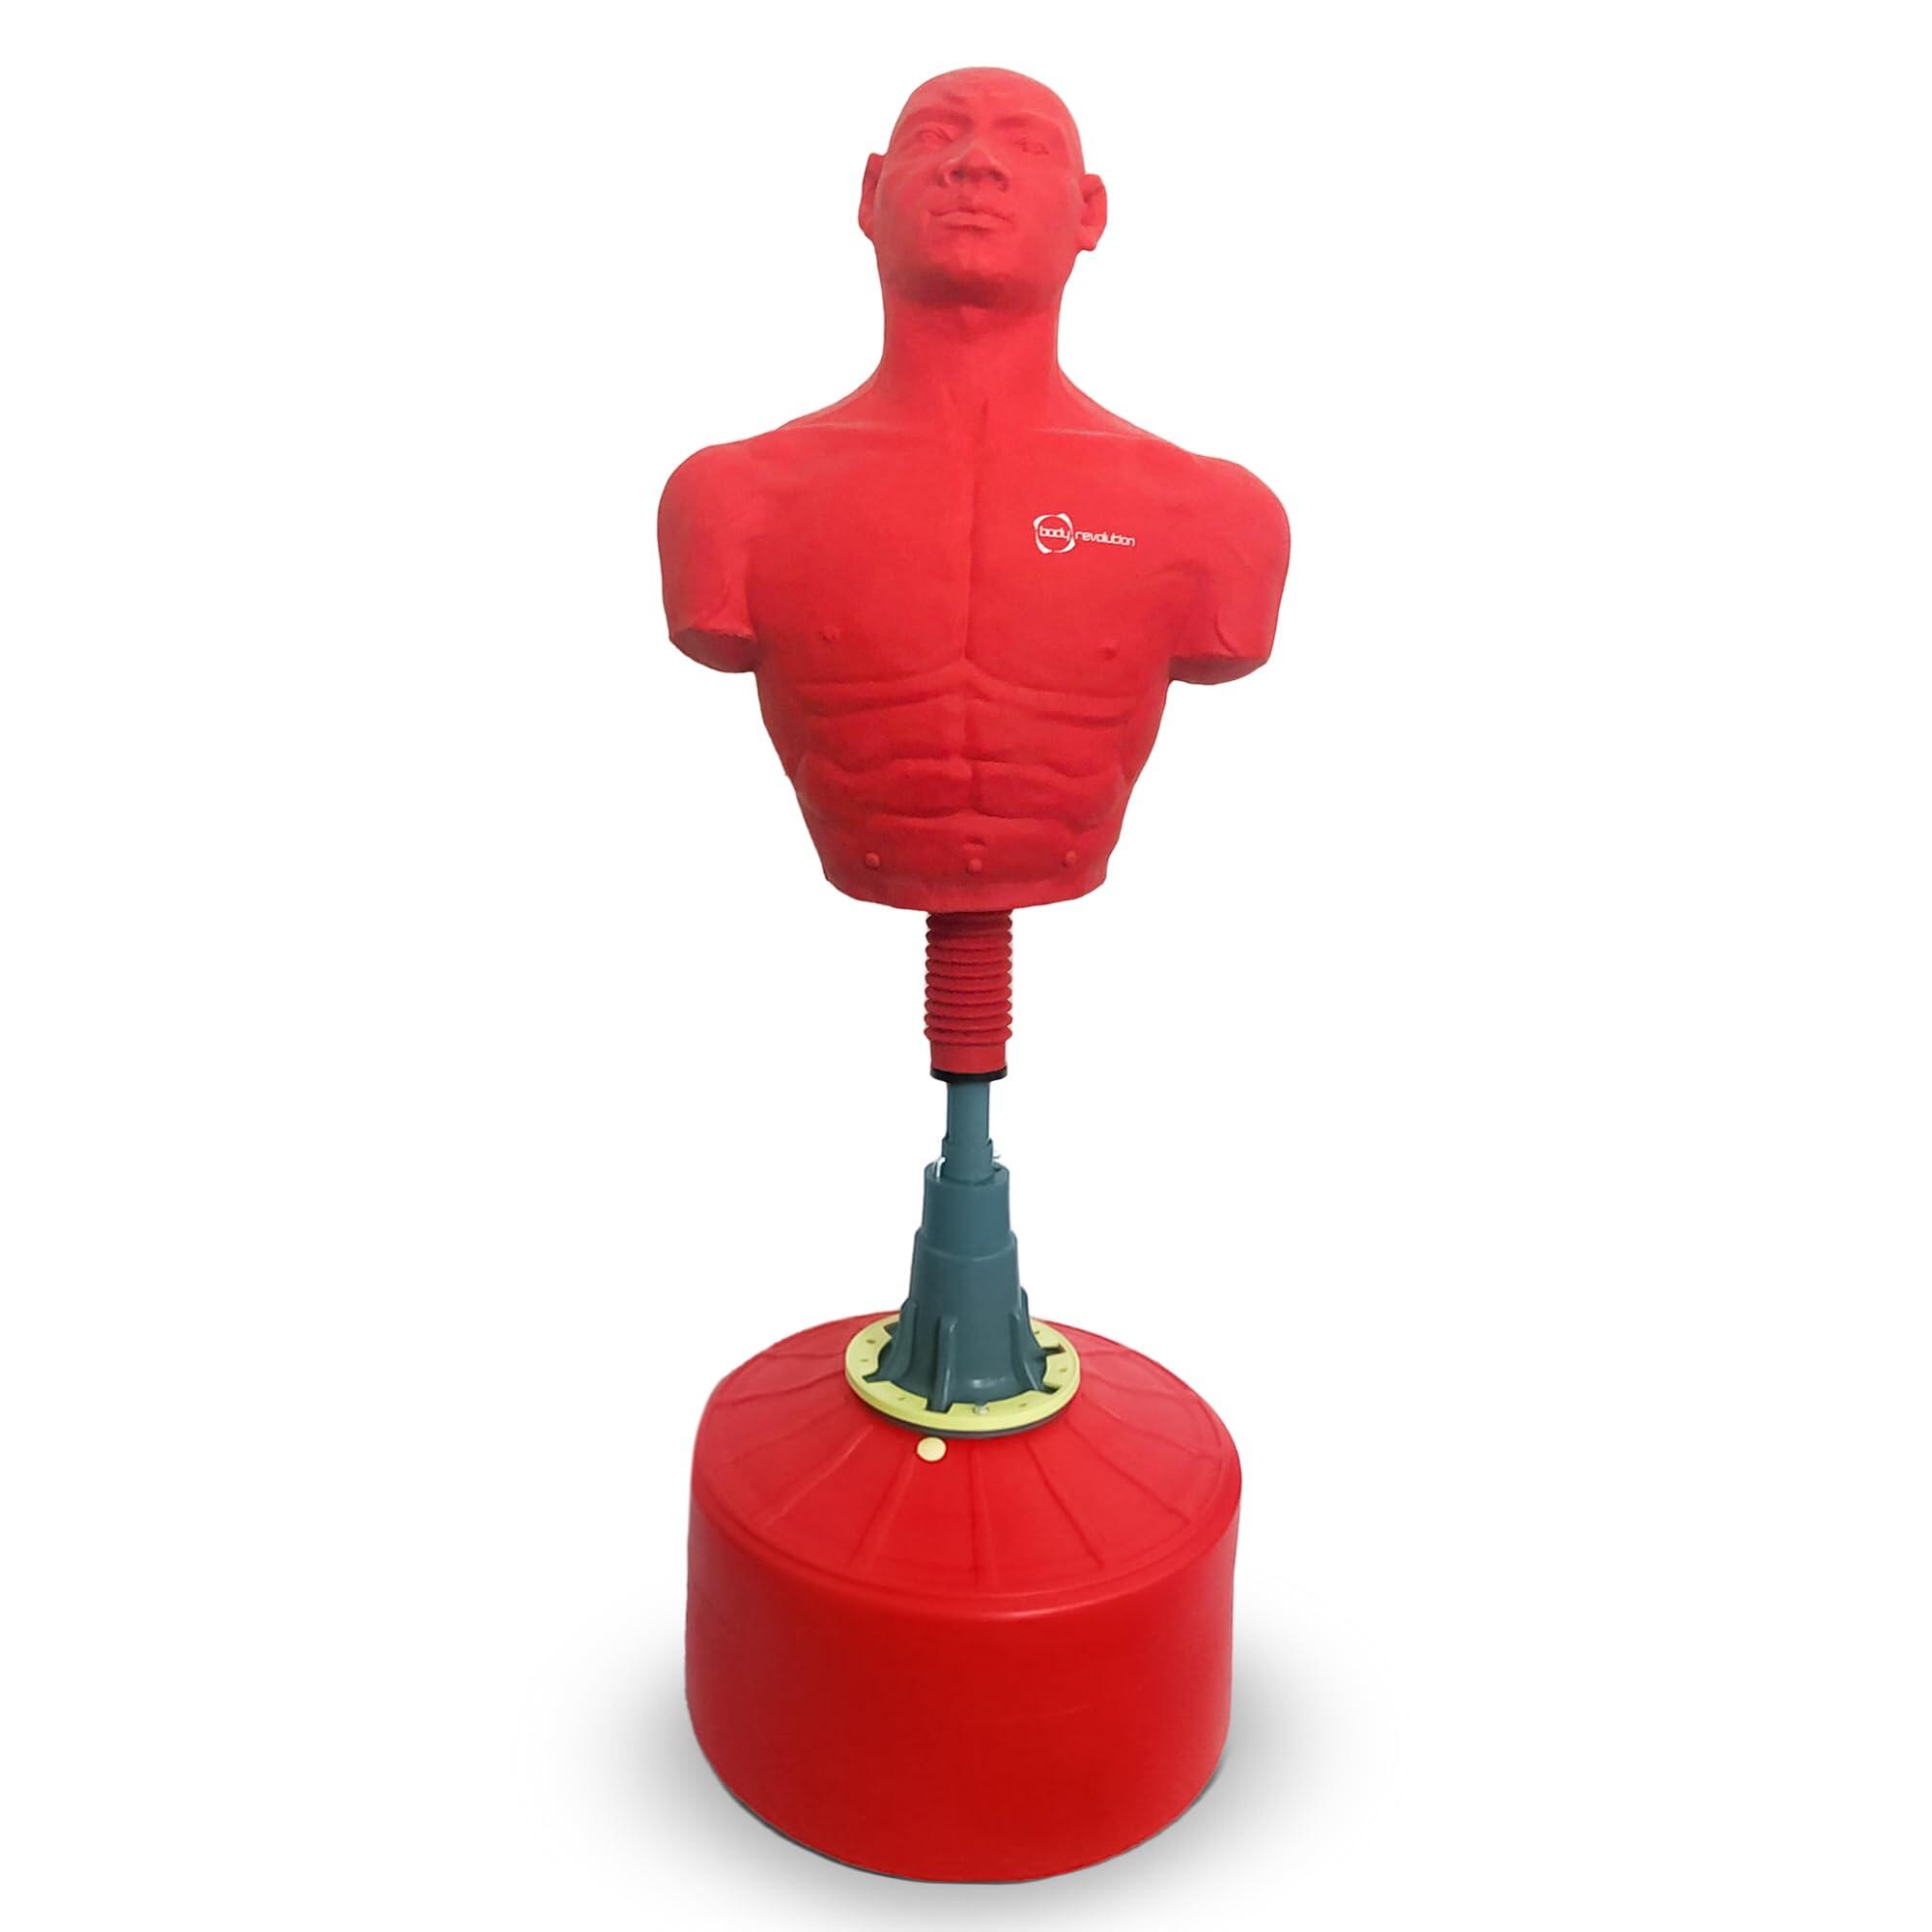 BODY REVOLUTION Free-standing Boxing Dummy Large Build